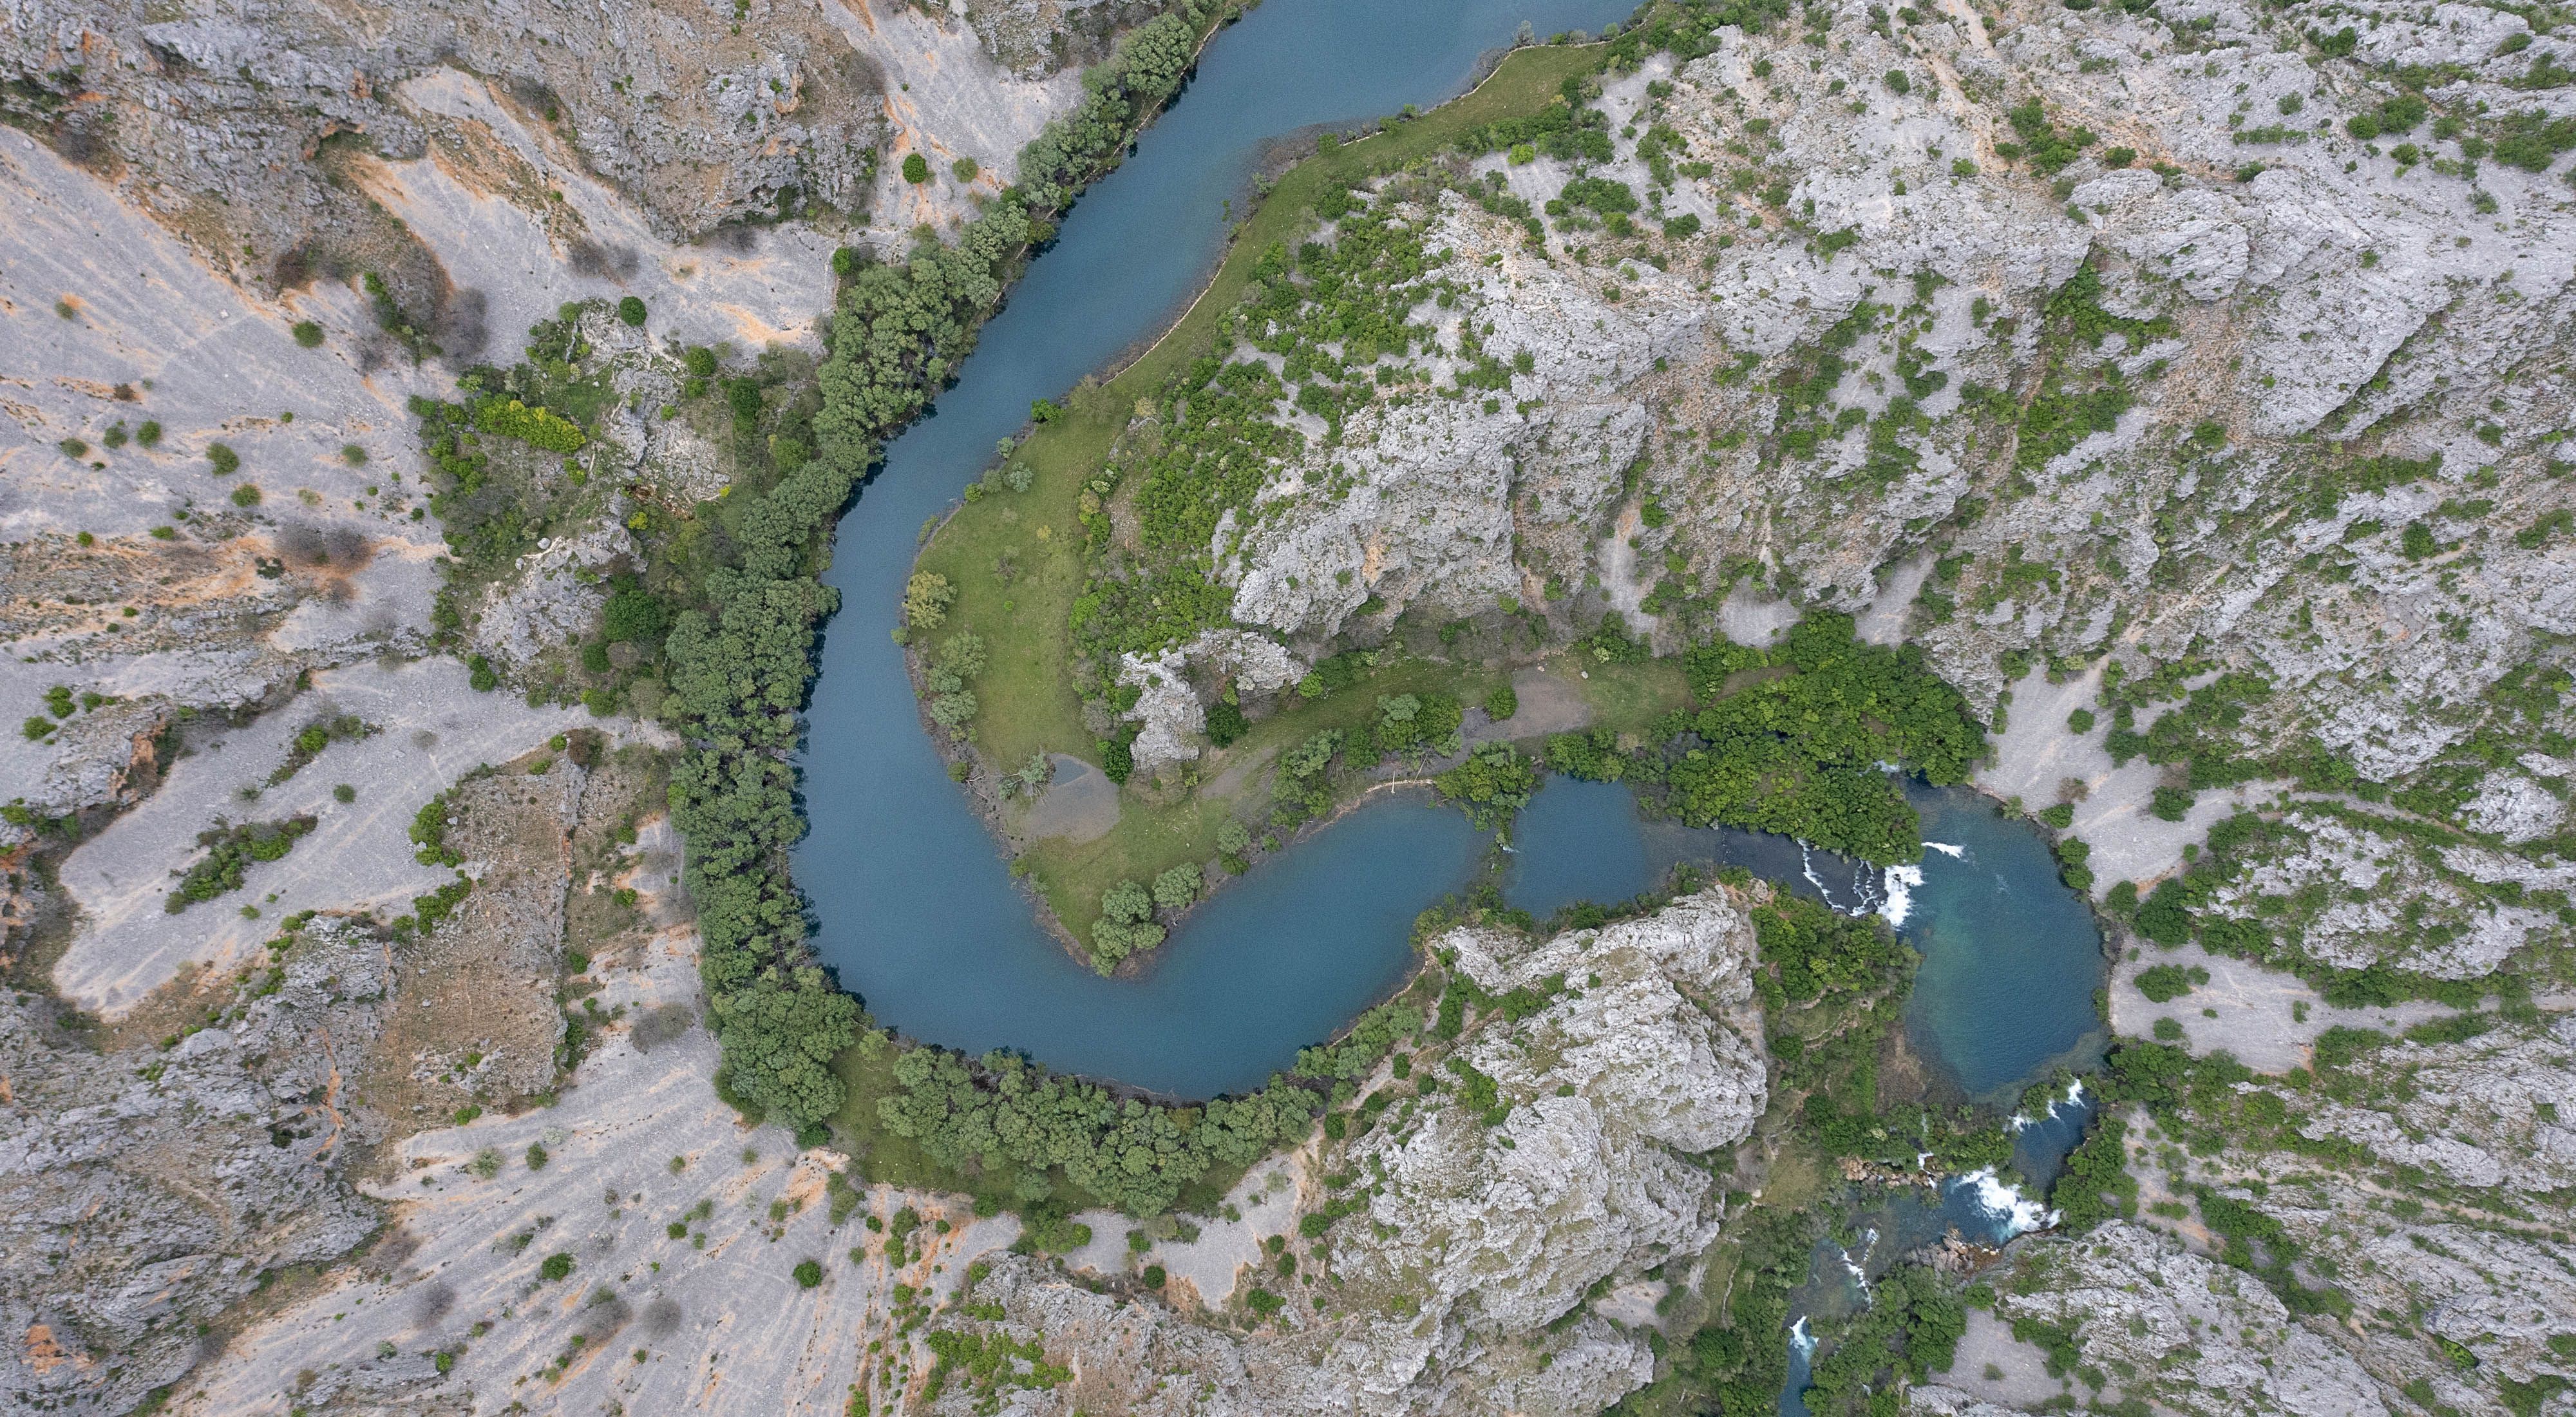 Aerial view looking straight down on a river that winds in an S curve through rocky terrain.